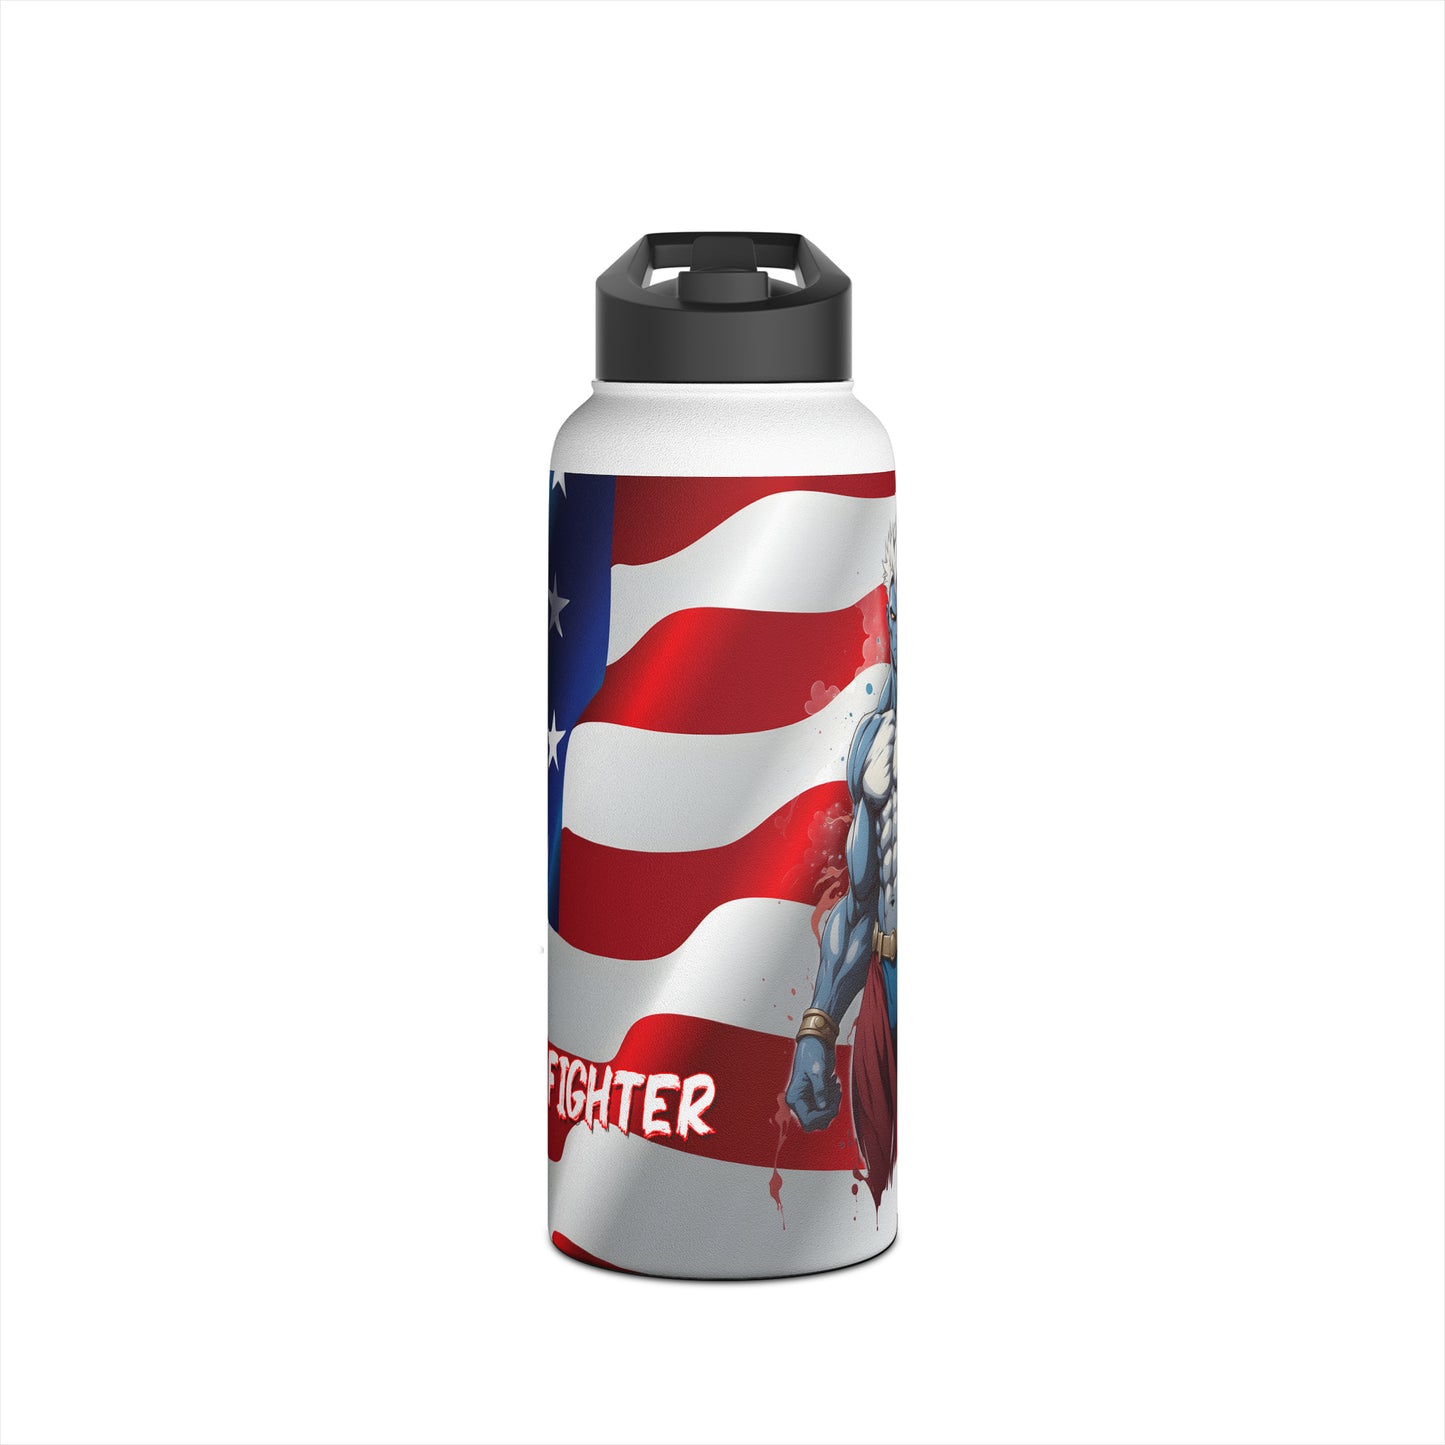 Kǎtōng Piàn - Prized Fighter Collection - America - 002 - Stainless Steel Water Bottle, Standard Lid